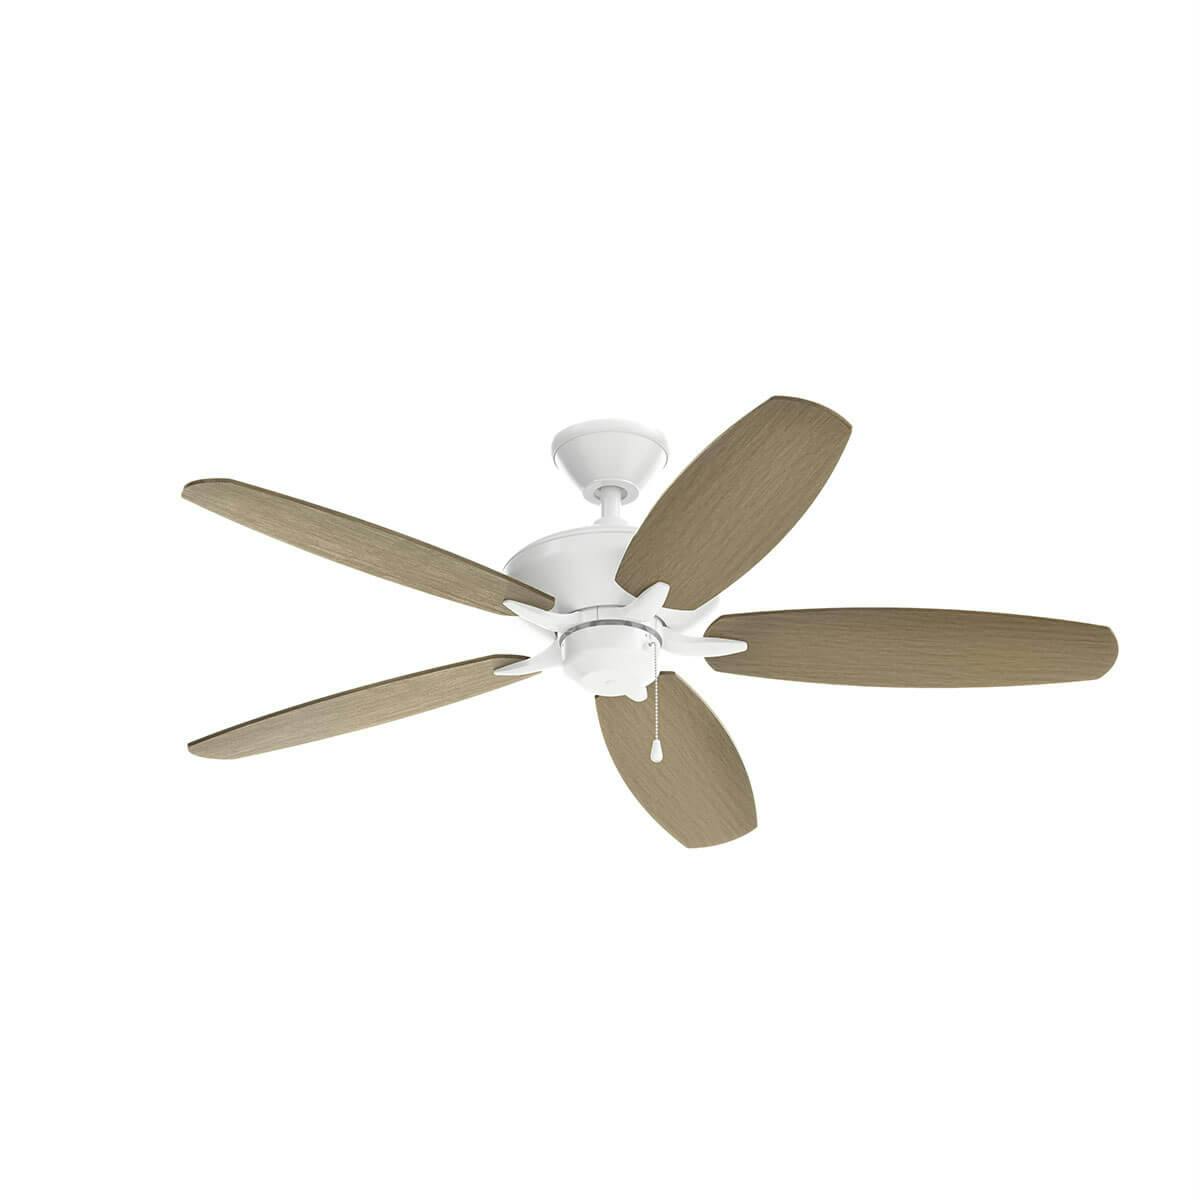 52" Renew Ceiling Fan Matte White on a white background